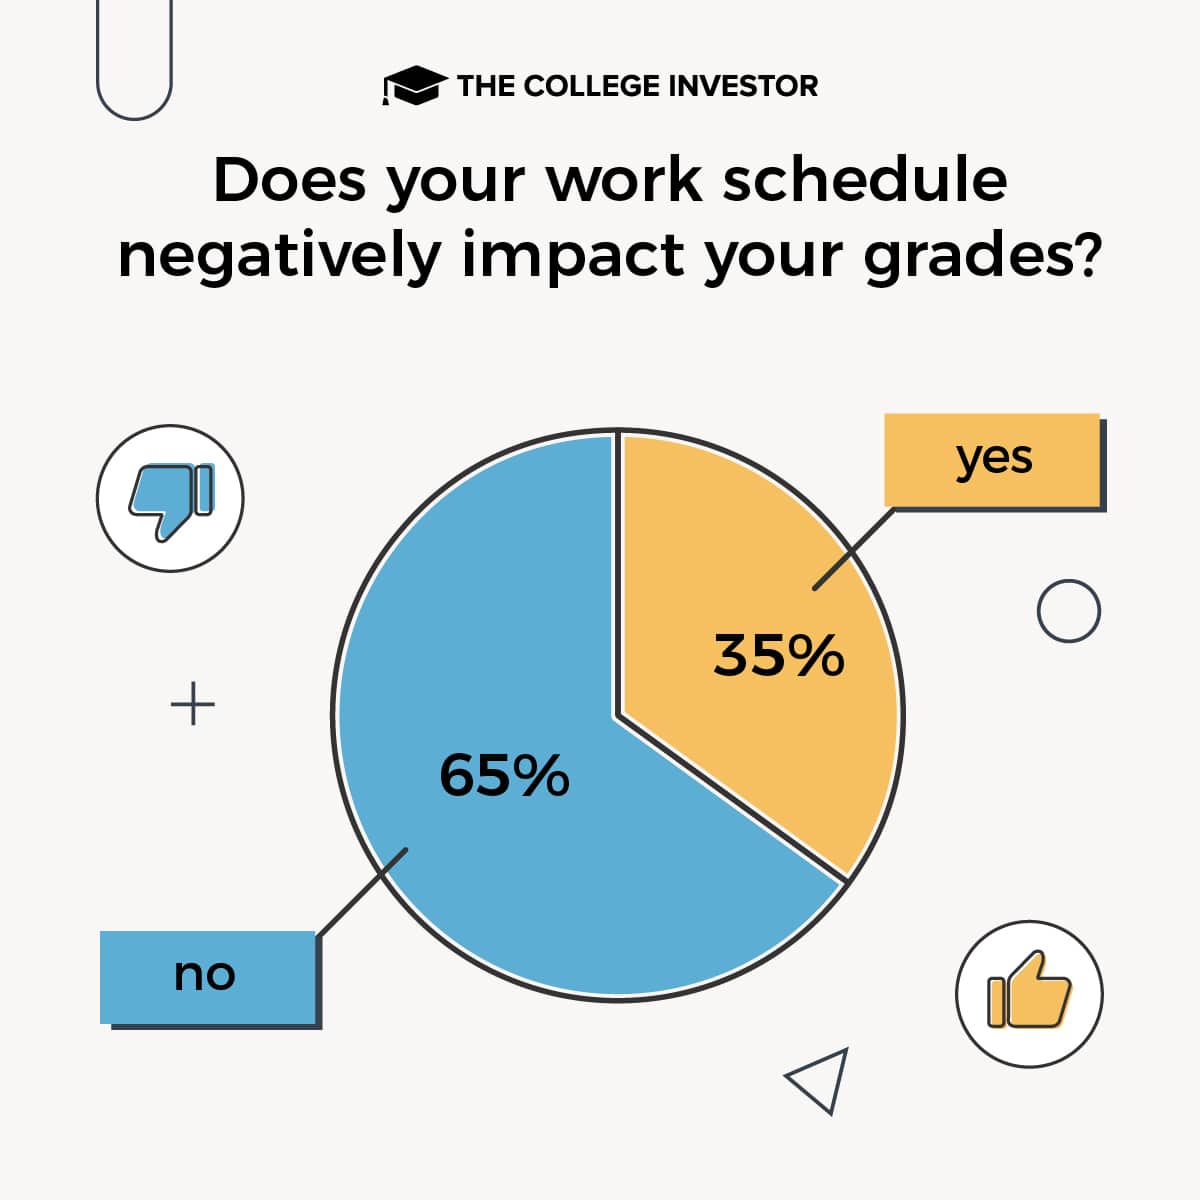 students choose to work survey results